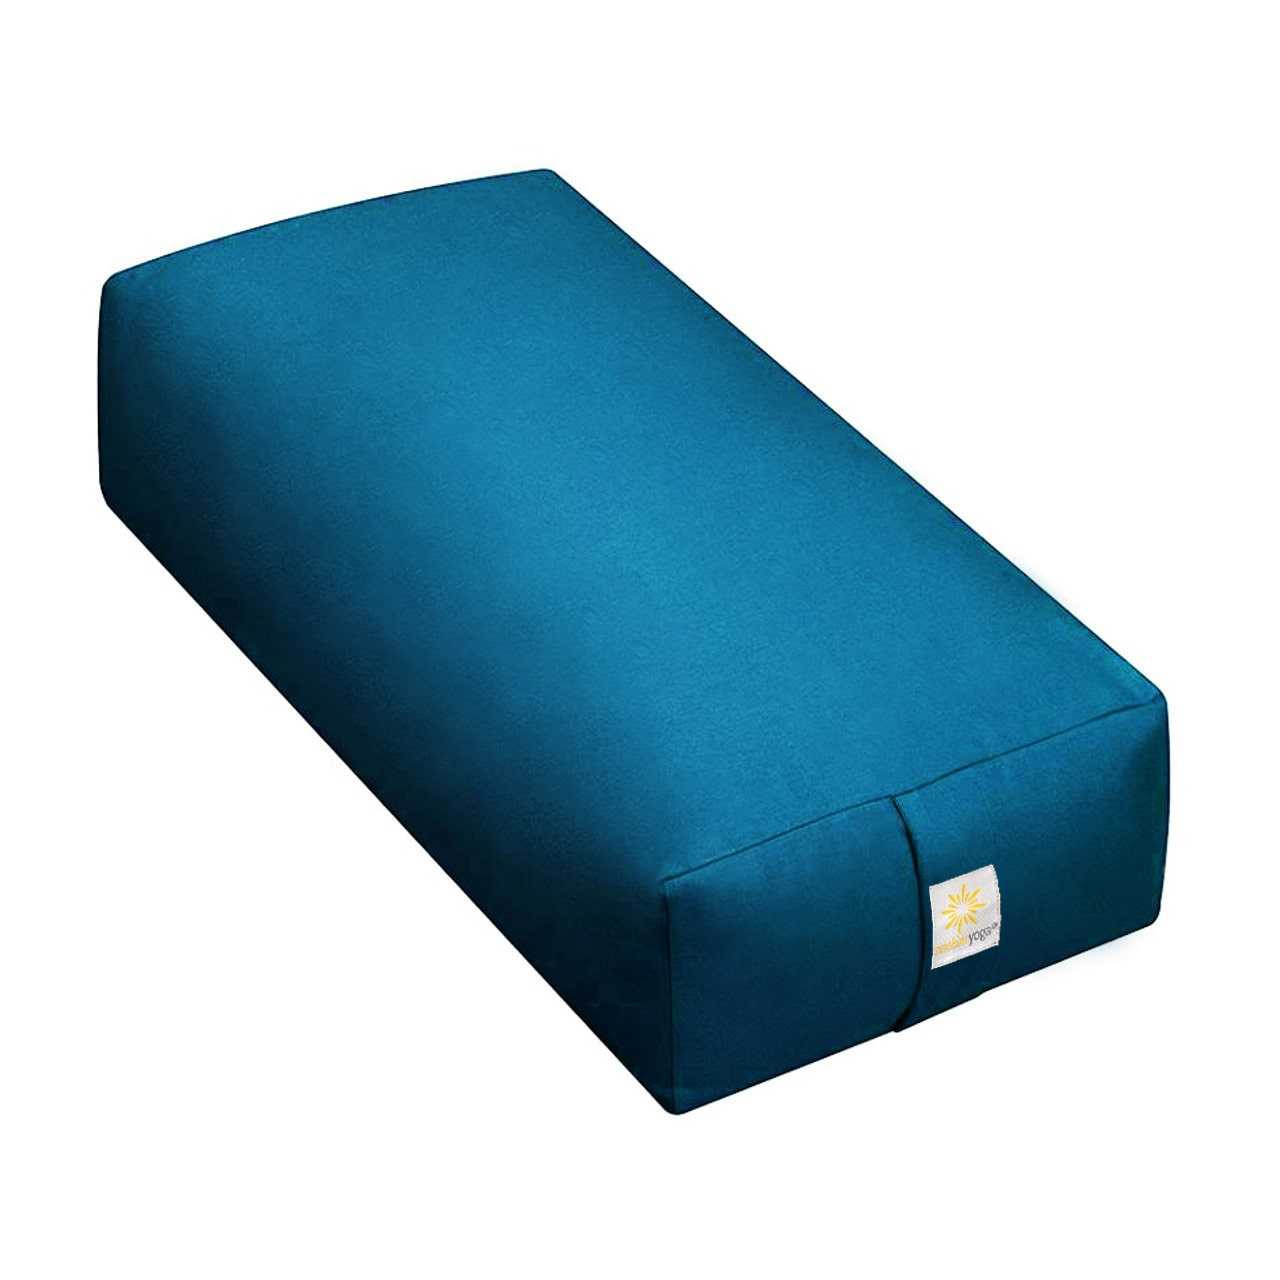 https://cdn11.bigcommerce.com/s-zu9c0wie59/images/stencil/1280x1280/products/721/5076/Deluxe-Firm-Large-Rectangular-Yoga-Bolster-24L-x-6H-x-12W_4328__94049.1710437290.jpg?c=2